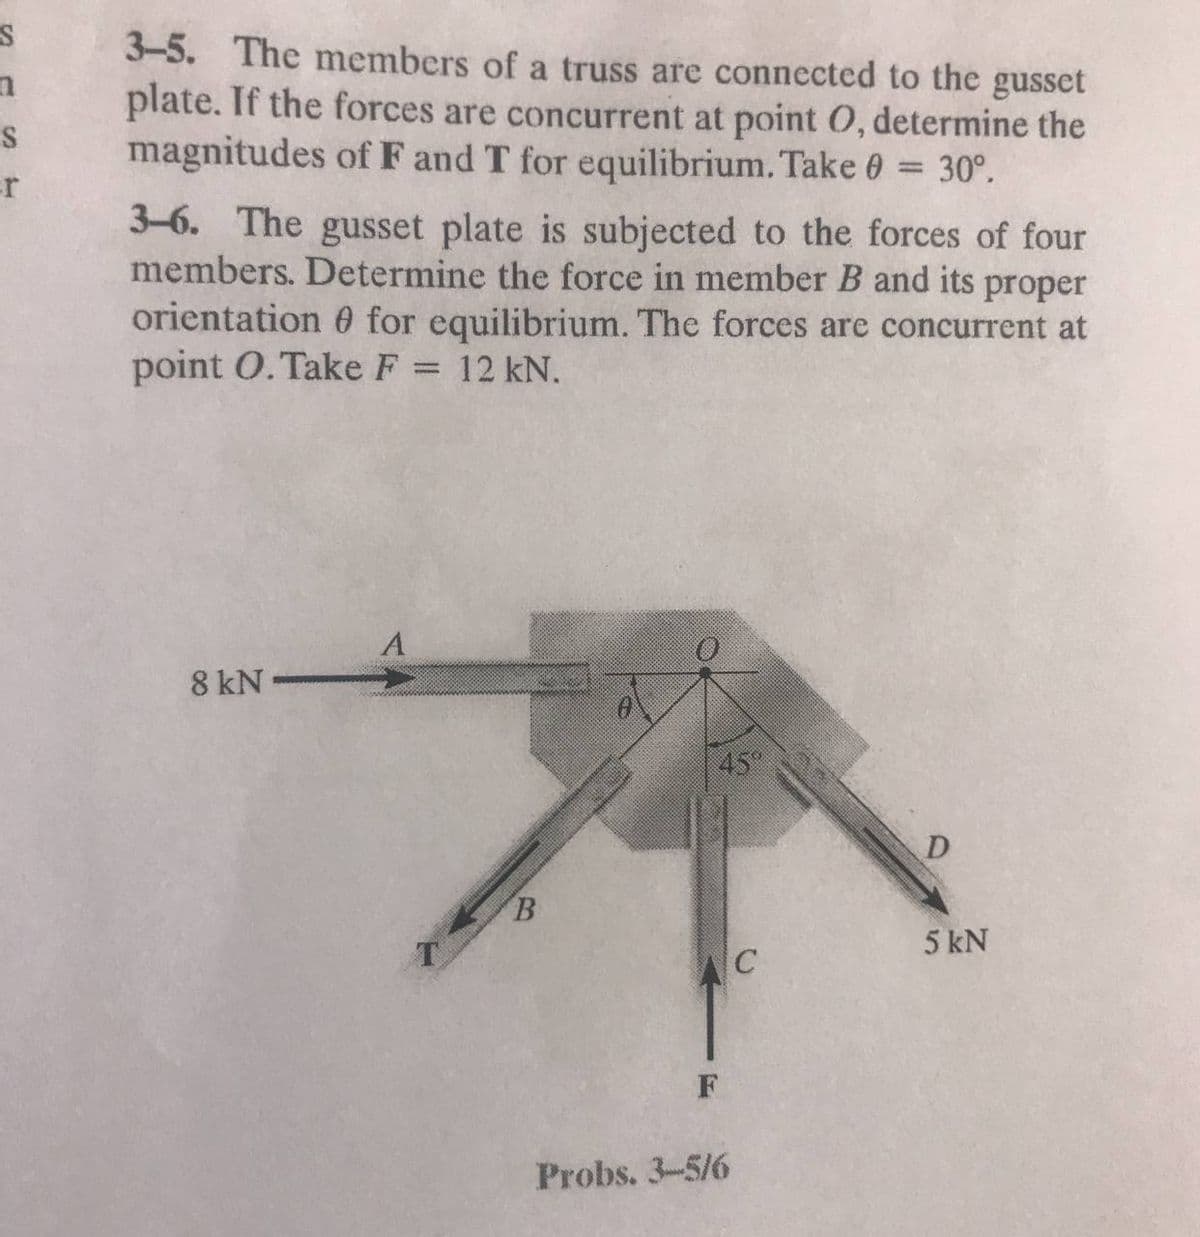 3-5. The members of a truss are connected to the gusset
plate. If the forces are concurrent at point 0, determine the
magnitudes of F and T for equilibrium. Take 0 = 30°.
er
3-6. The gusset plate is subjected to the forces of four
members. Determine the force in member B and its proper
orientation 0 for equilibrium. The forces are concurrent at
point O. Take F = 12 kN.
%3D
8 kN -
45
D
B.
5 kN
Probs. 3-5/6
